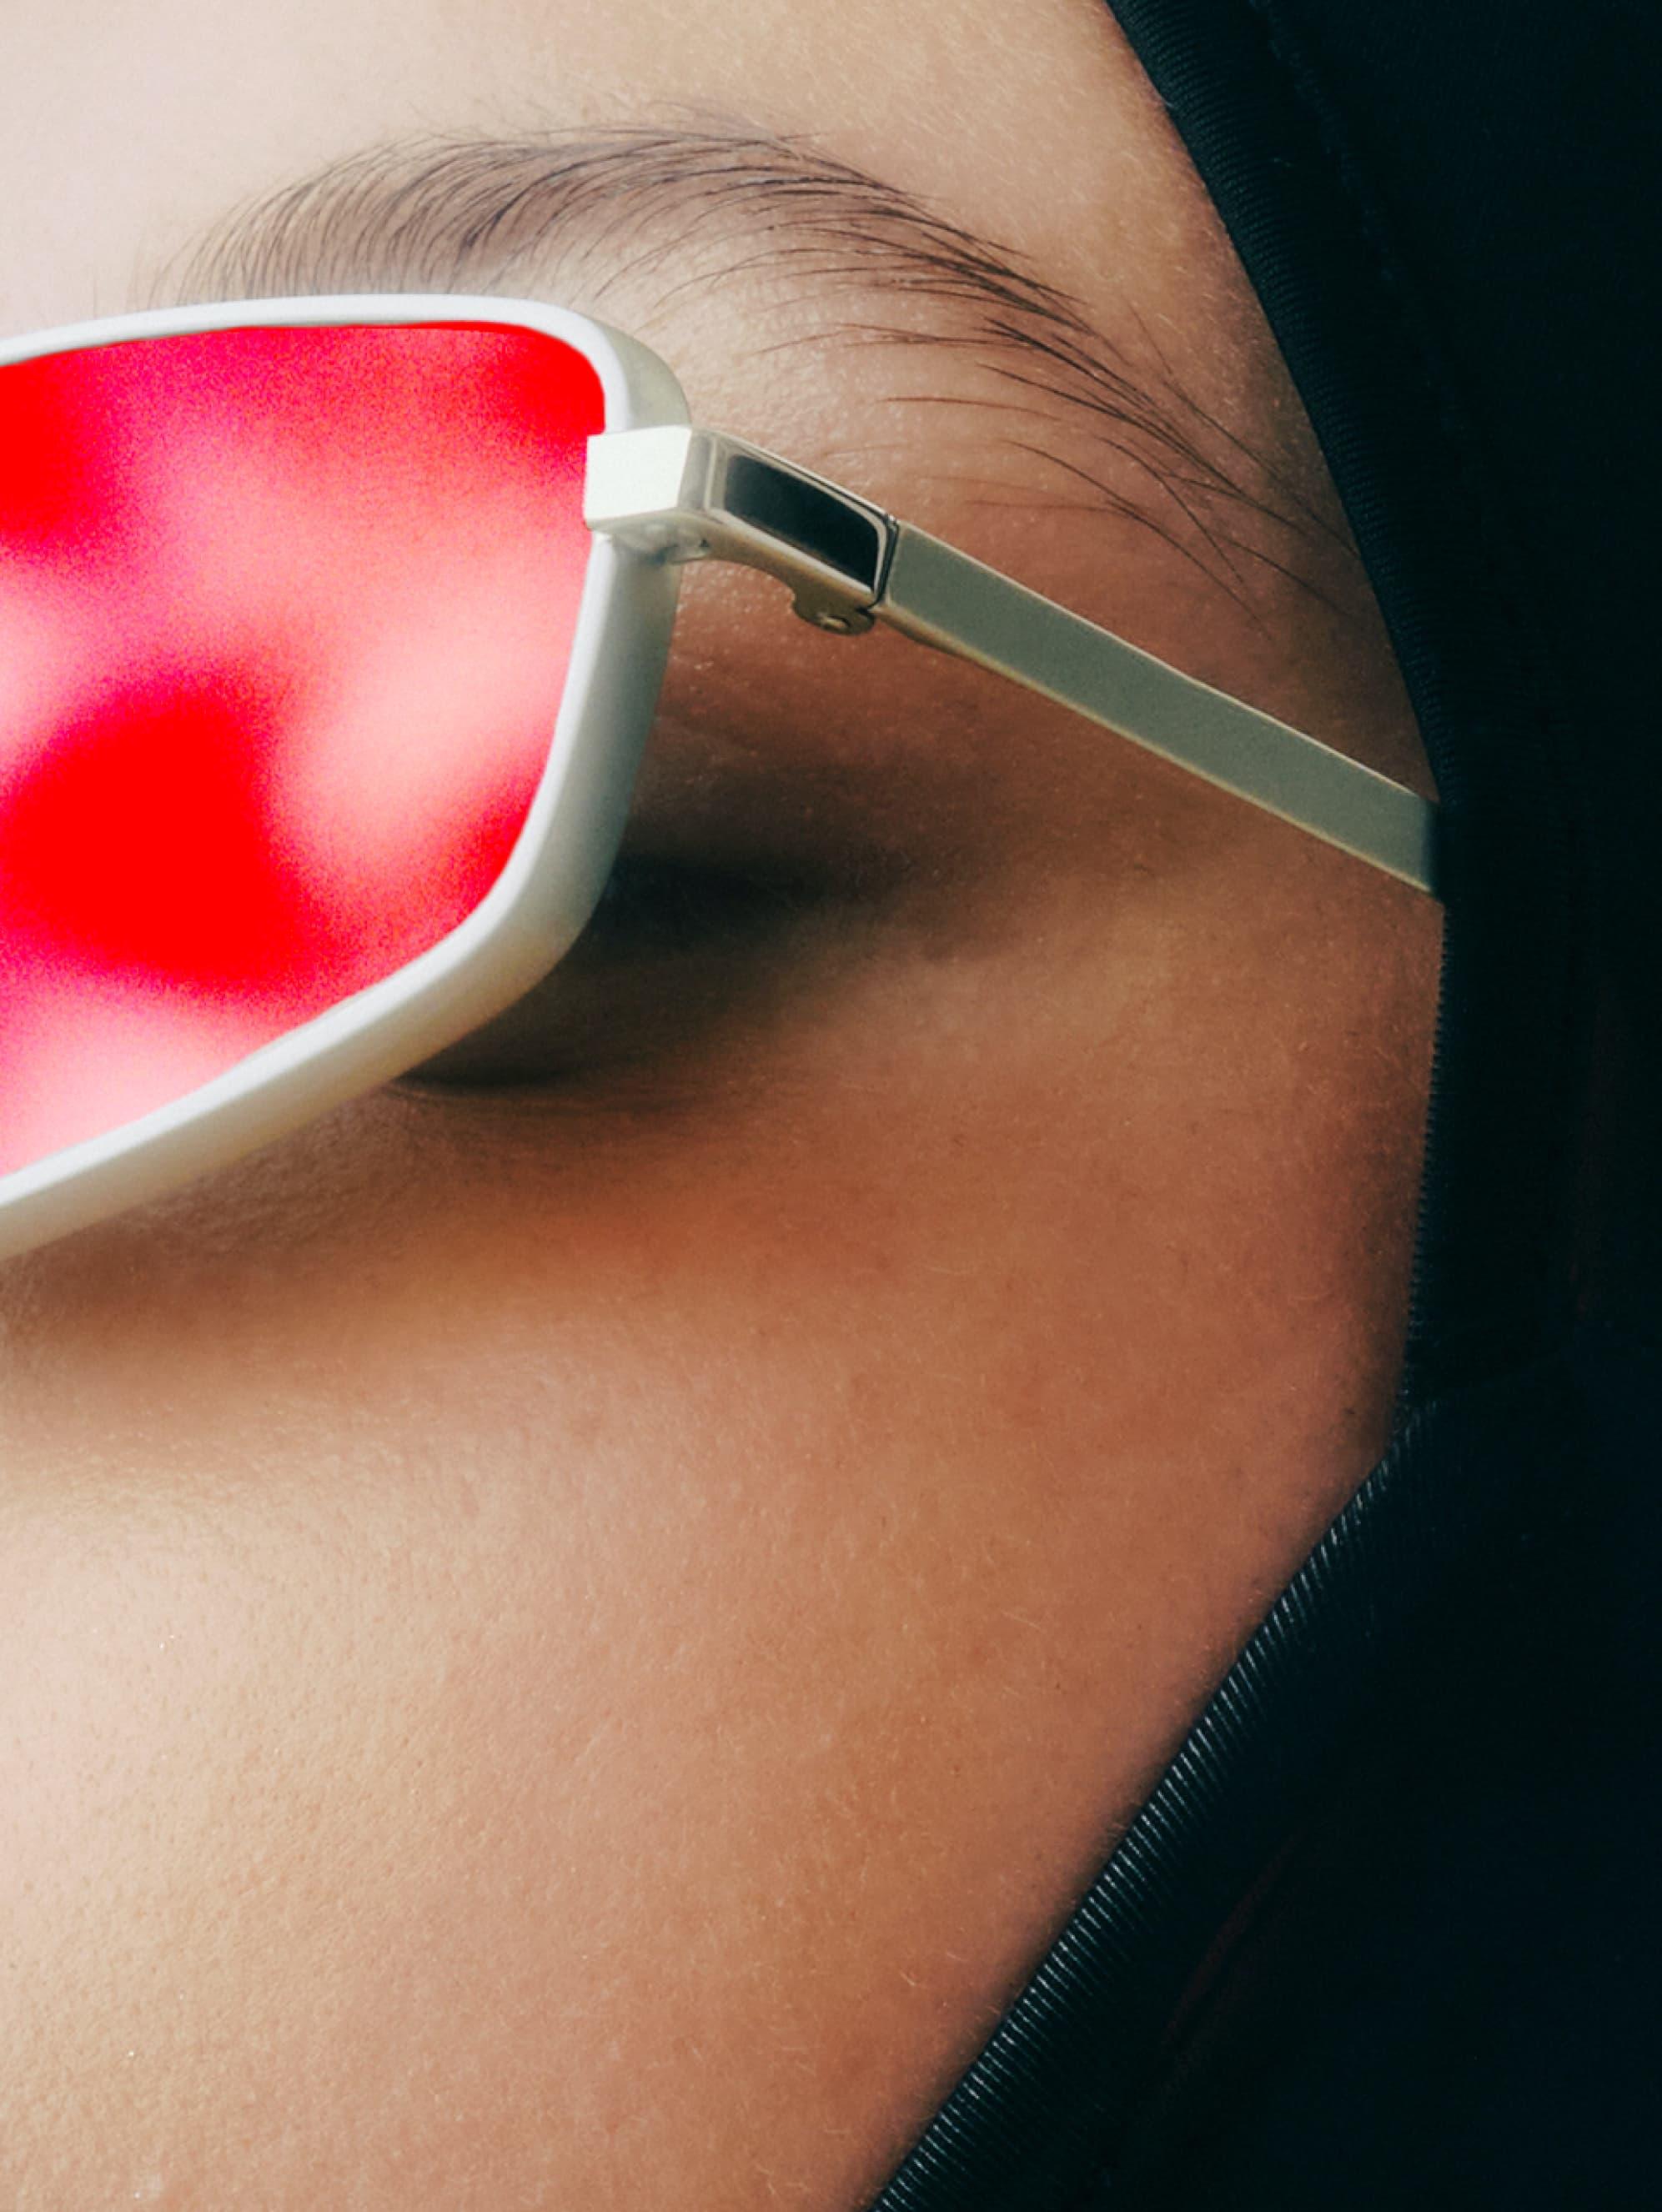 Face with red sunglasses